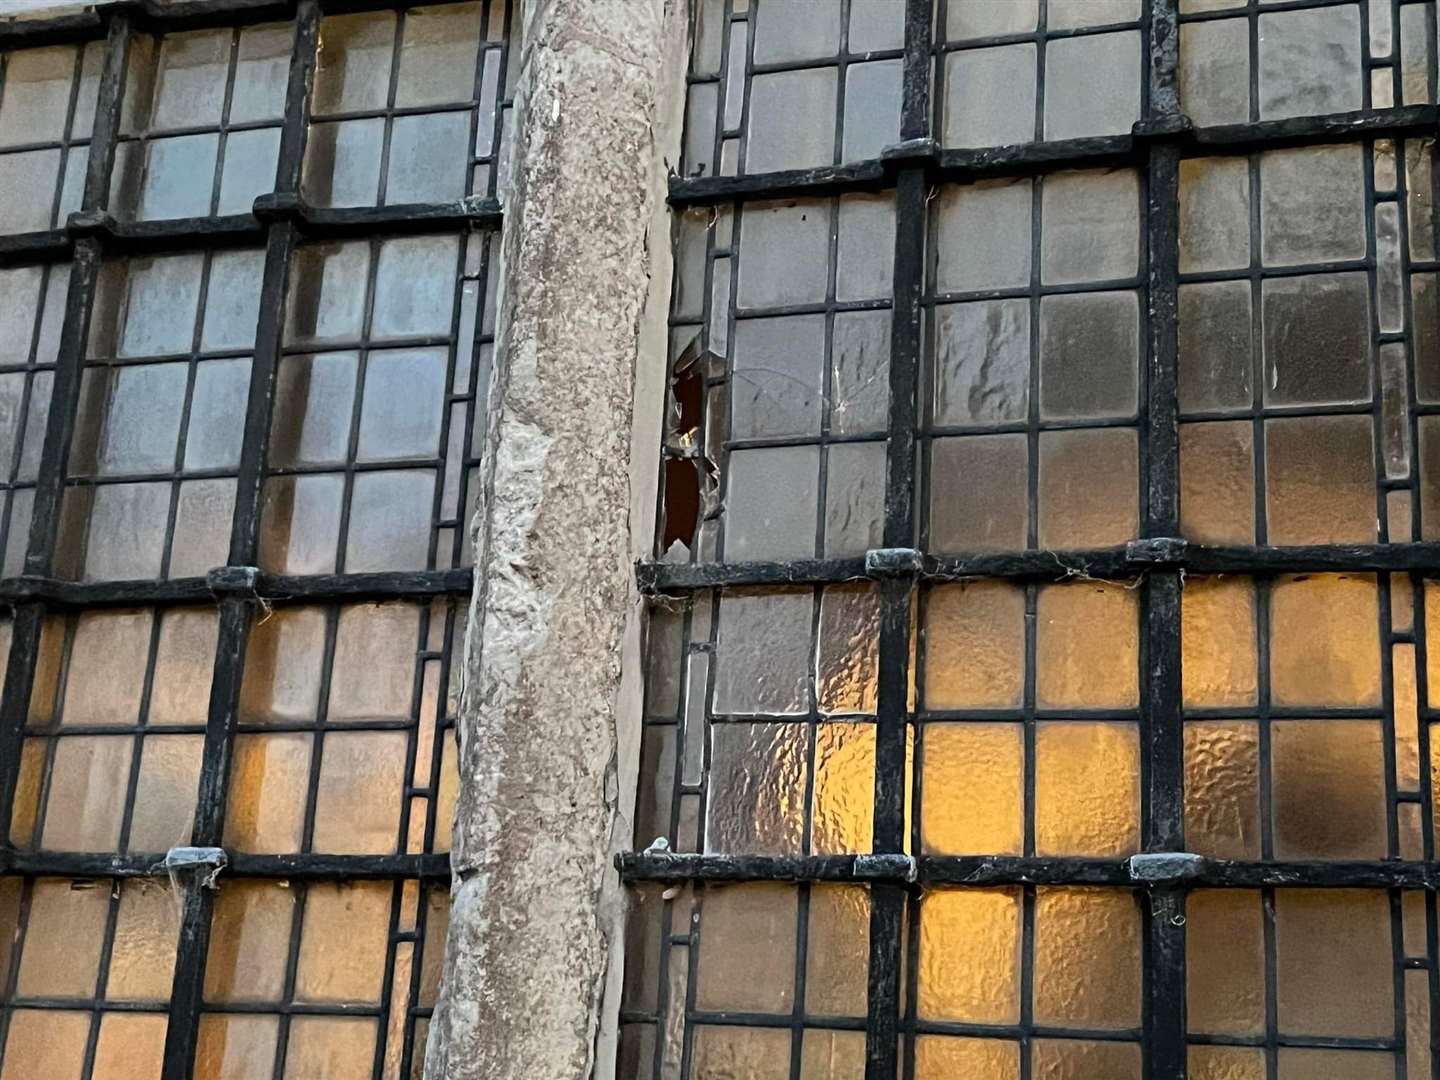 The damaged windows at the Cliffe church